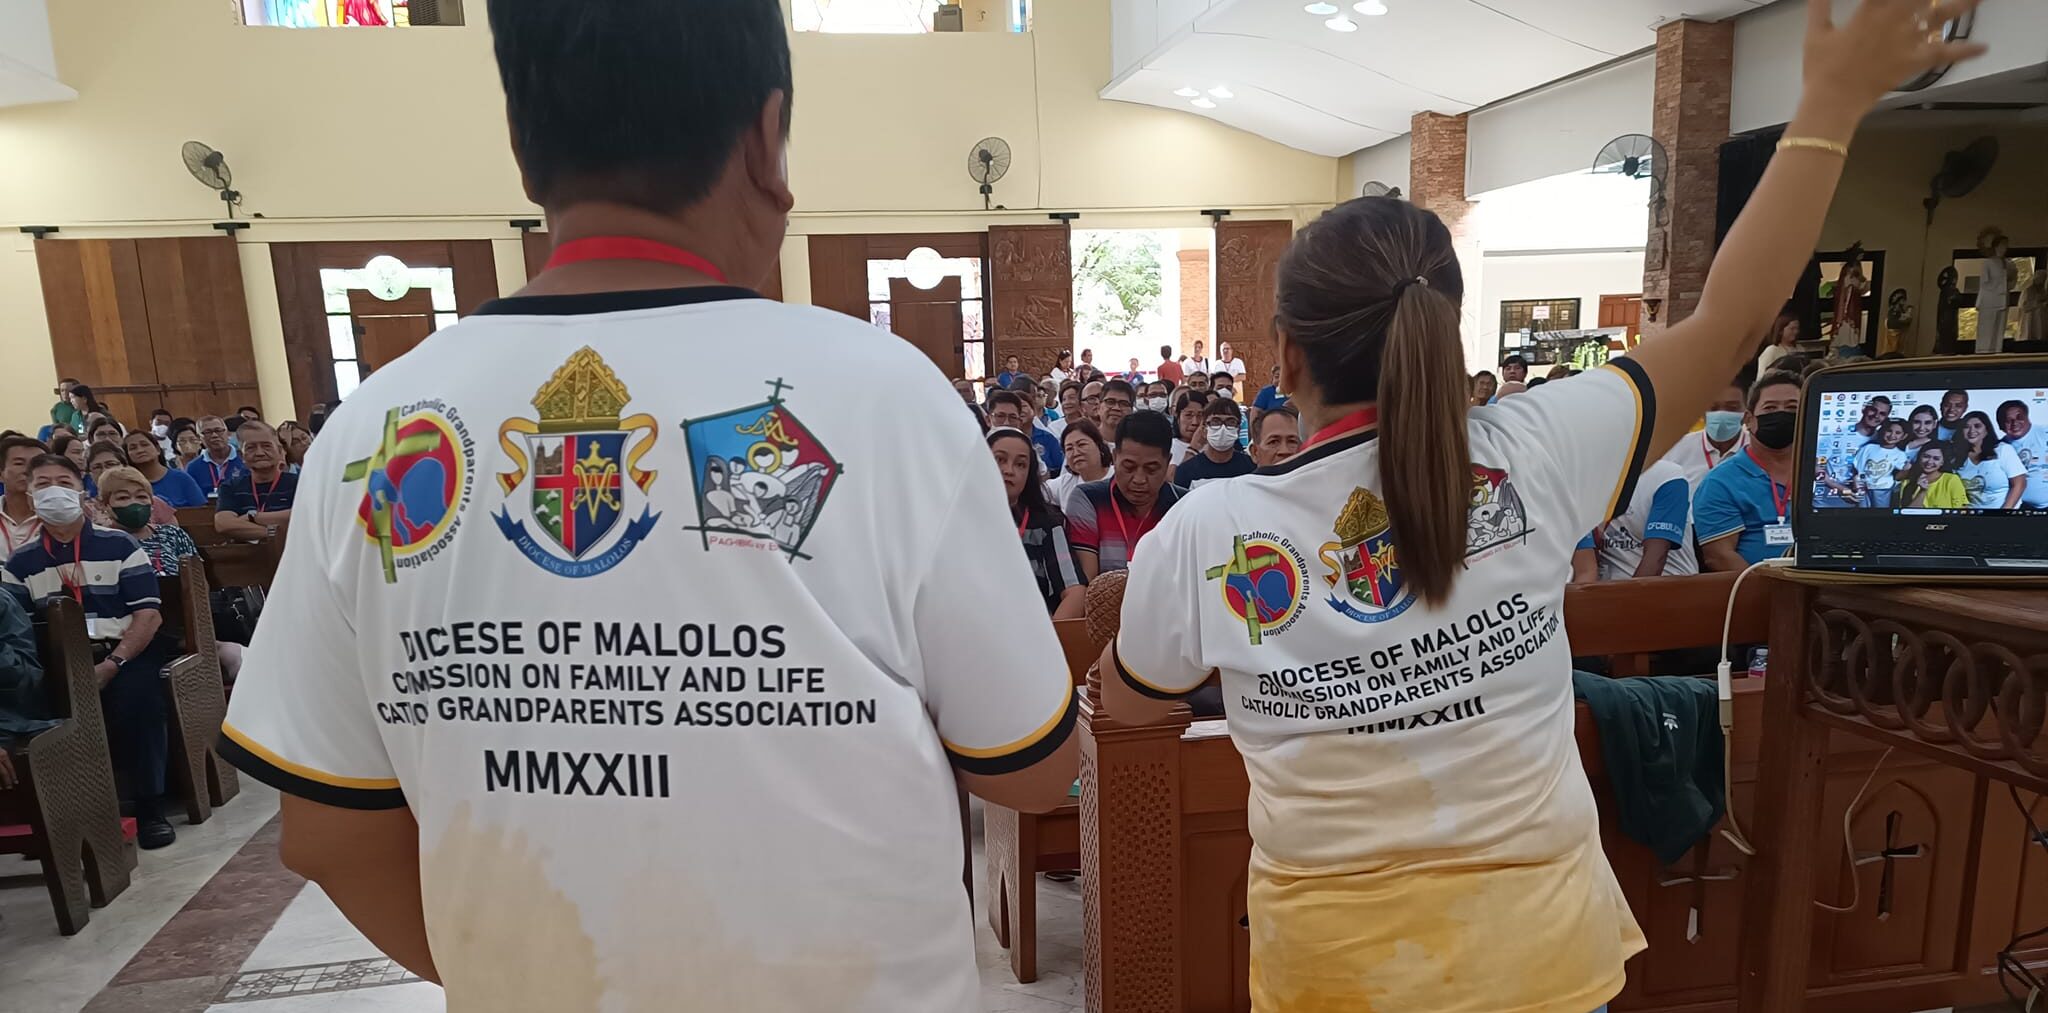 Diocese of Malolos relaunched the Catholic Grandparents Association under the Commission on Family and Life